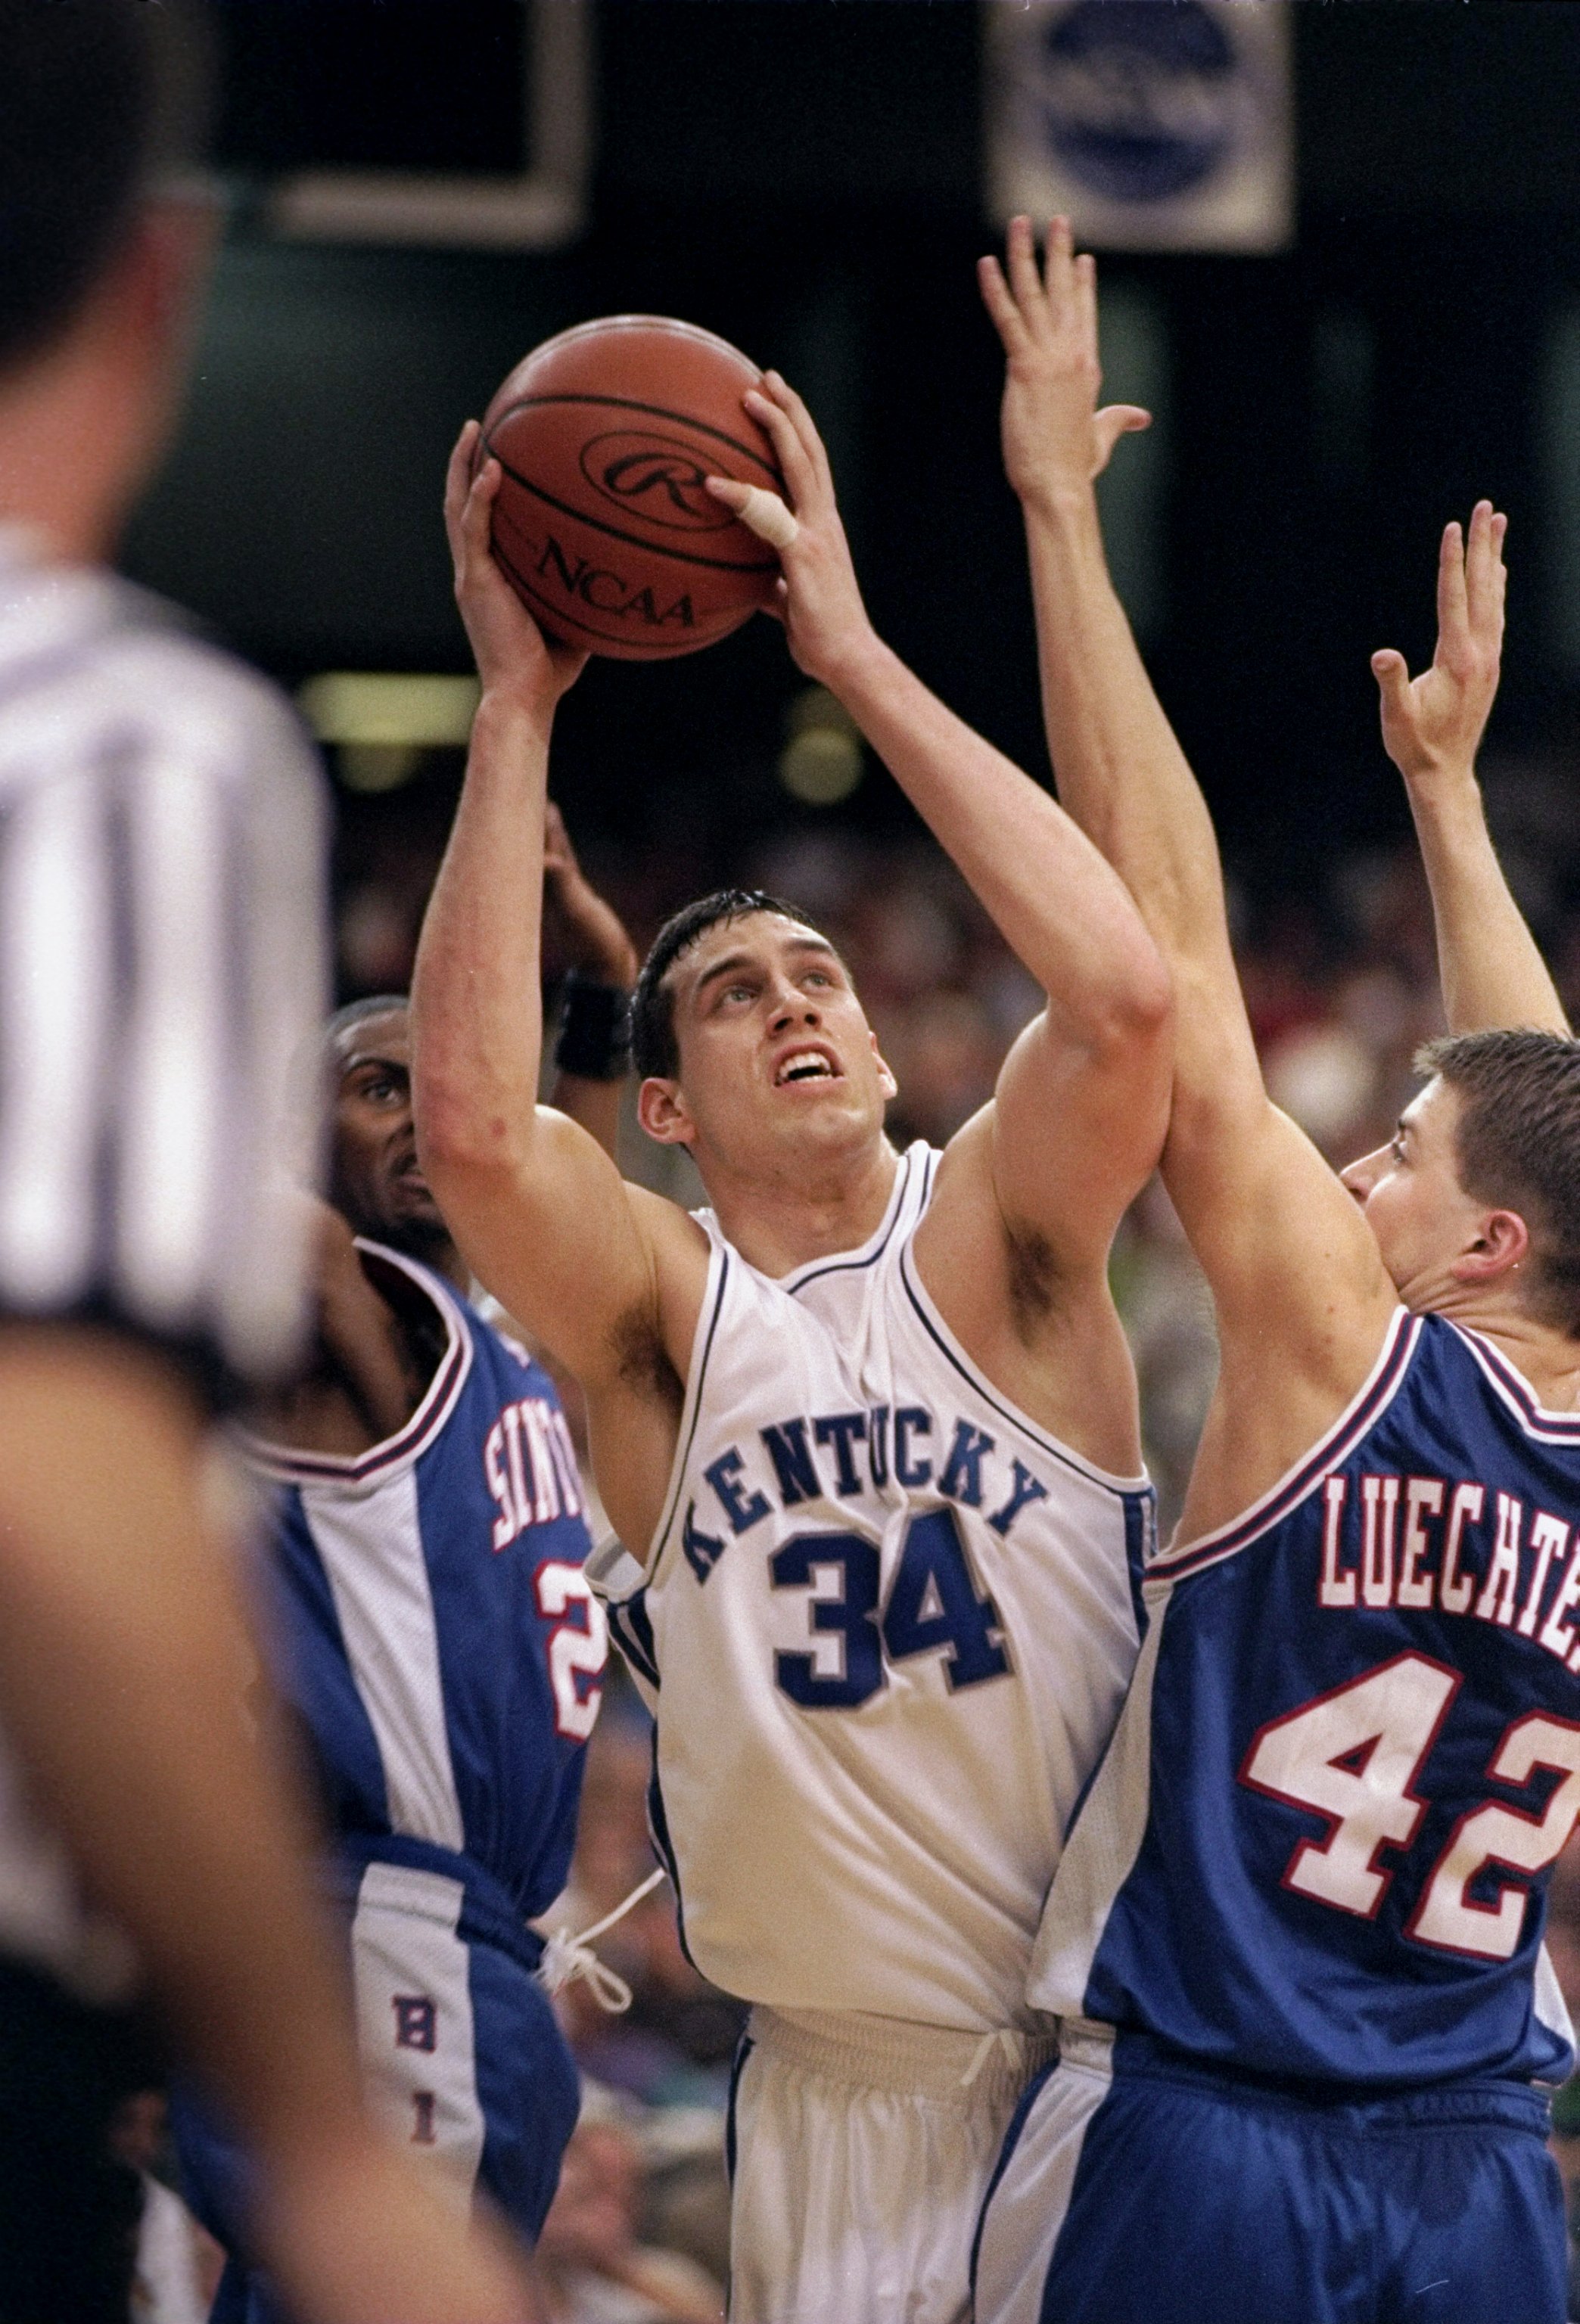 15 Mar 1998:  Forward Scott Padgett of the Kentucky Wildcats in action against forward Ryan Luechtefeld of the Saint Louis Billikens (right) during a game in the second round of the NCAA Tournament at the Georgia Dome in Atlanta, Georgia.  Kentucky defeat